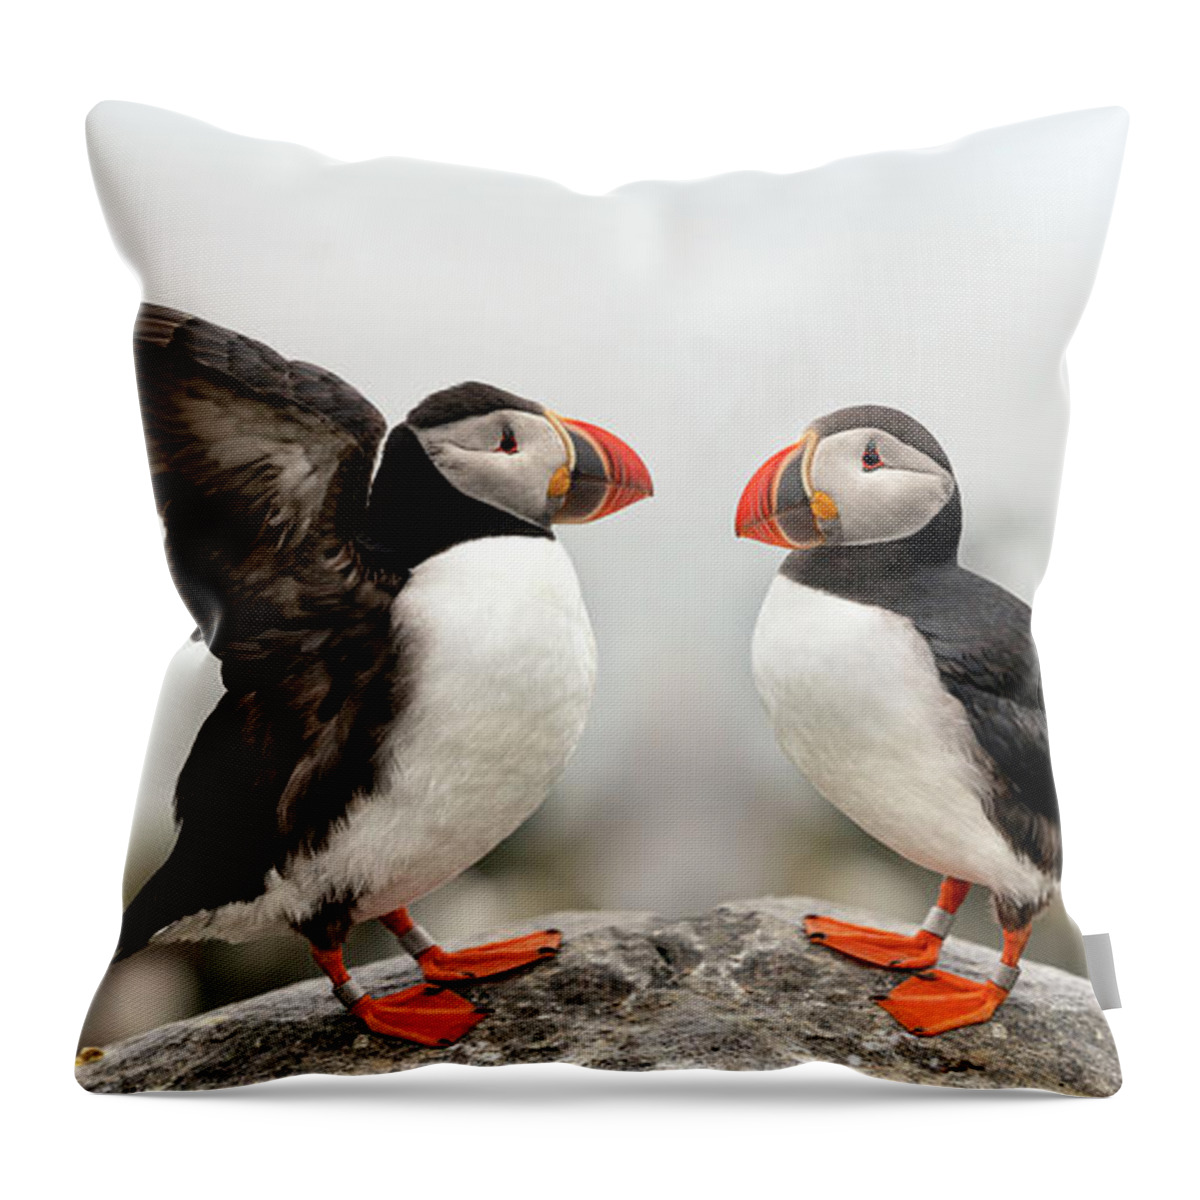  Throw Pillow featuring the photograph Spread Your Wings and Fly by Darylann Leonard Photography